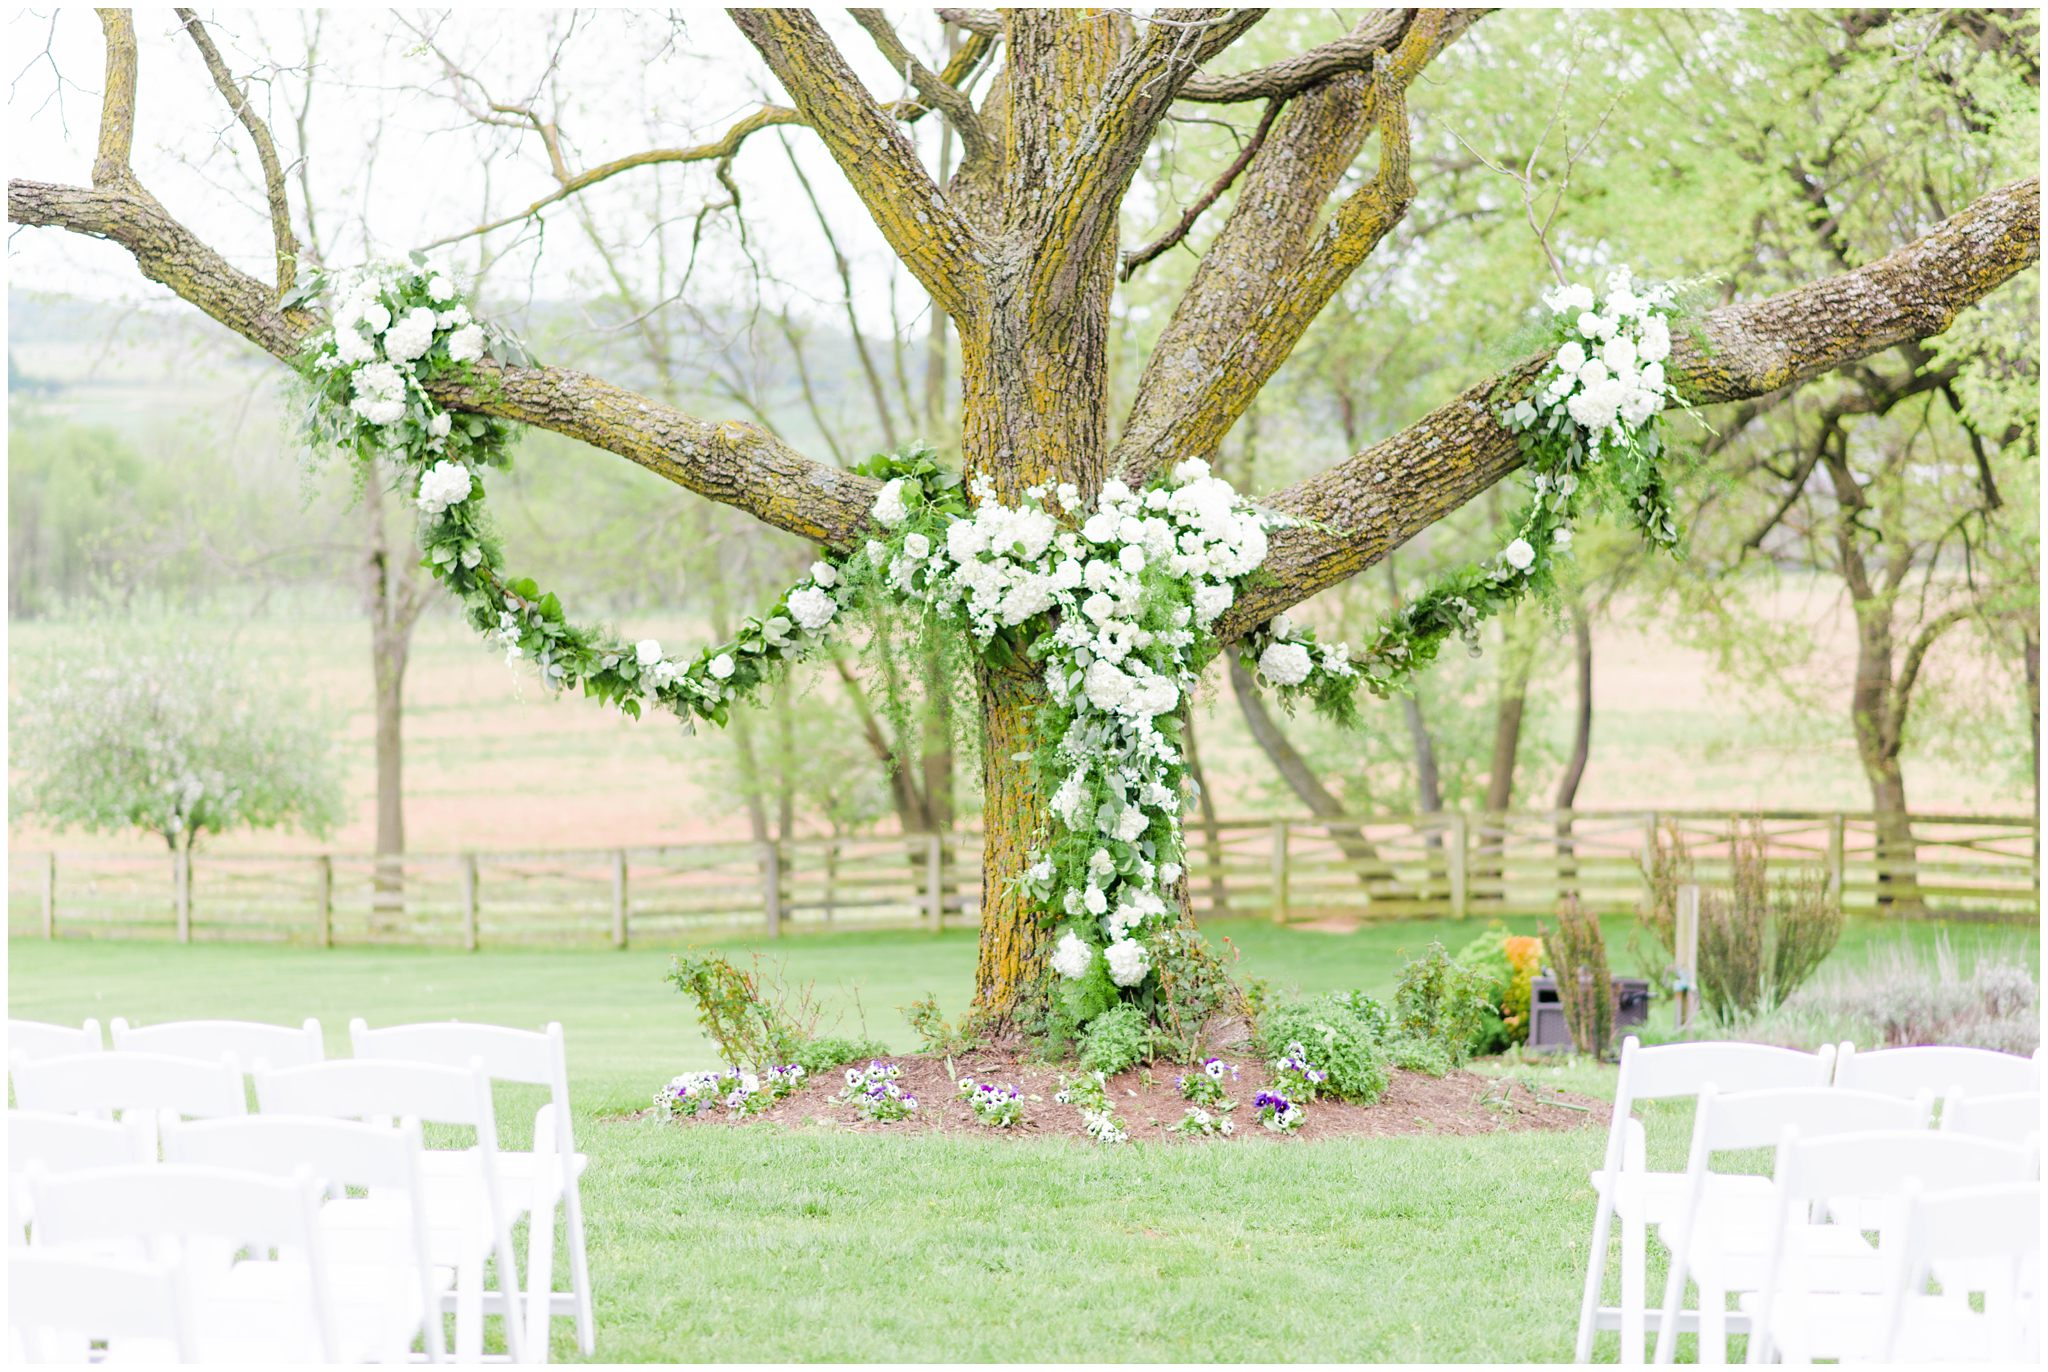 Gorgeous green and white floral garland | caitkramer.com